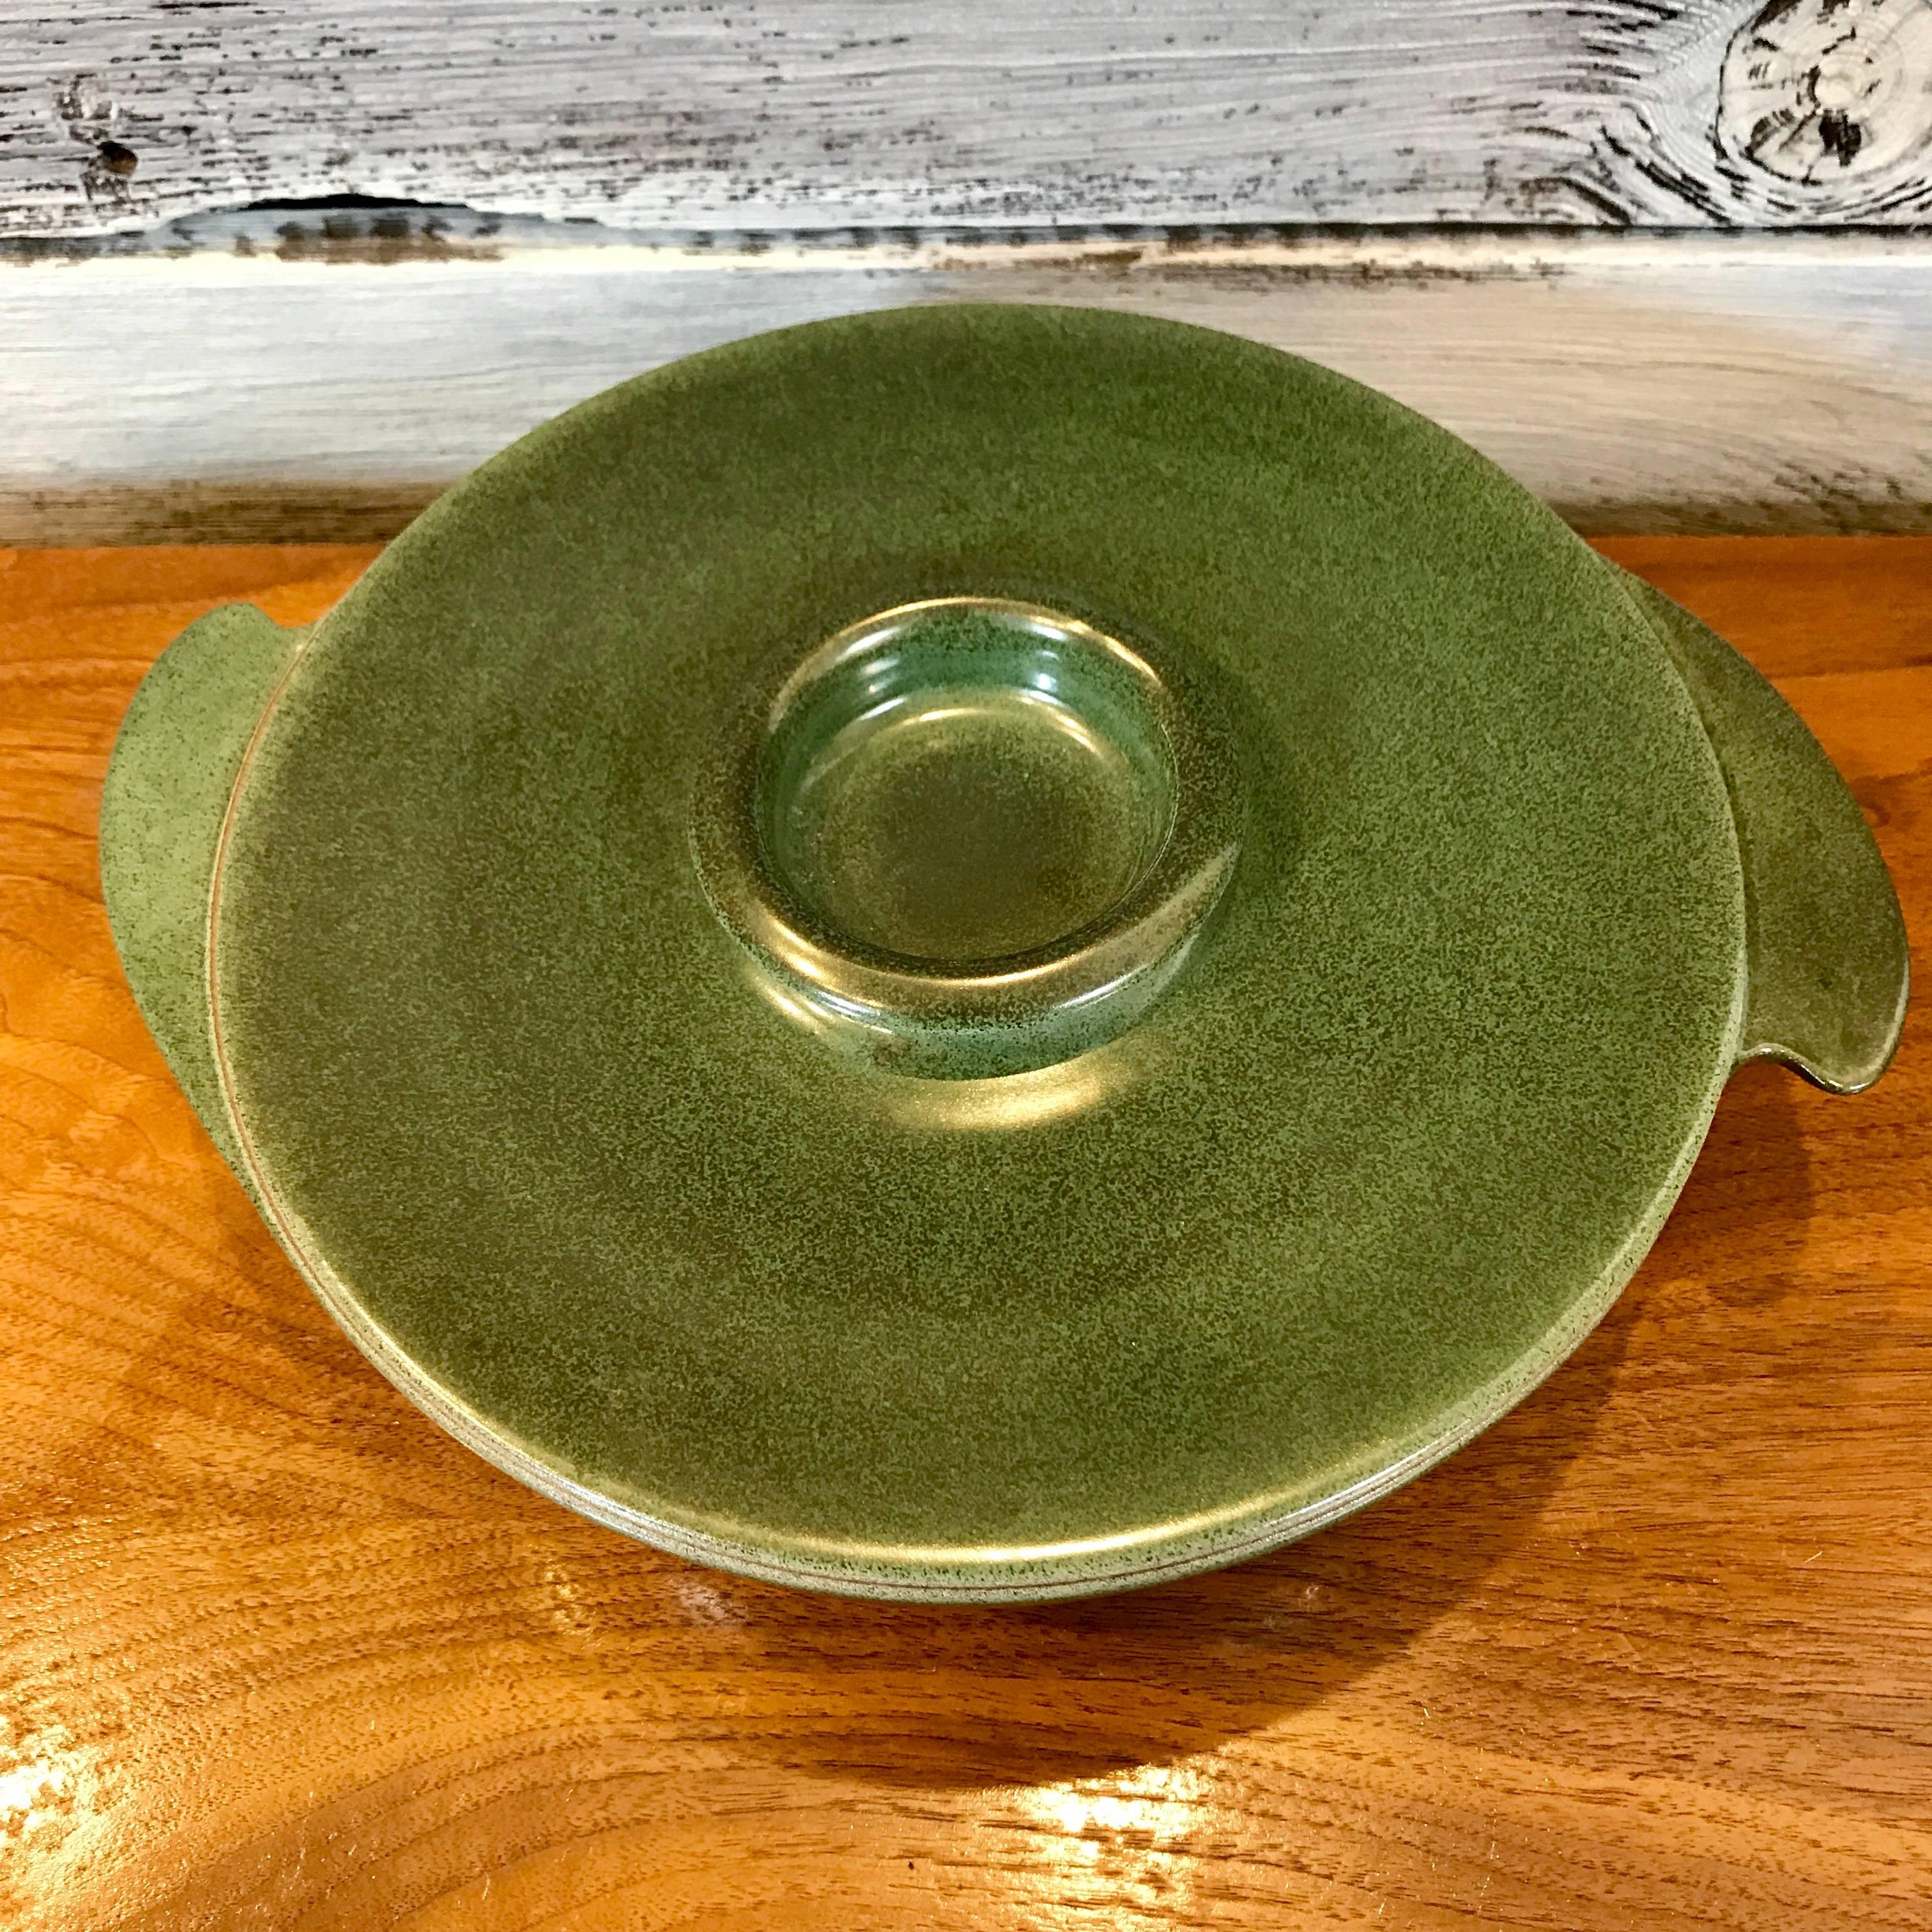 1940s winged covered serving bowl/casserole by Edith Heath for Heath Ceramics of Sausalito, California. An early Heath design, with two wings on the side of the bowl and early Heath markings on the underside. Metallic green glaze, in excellent